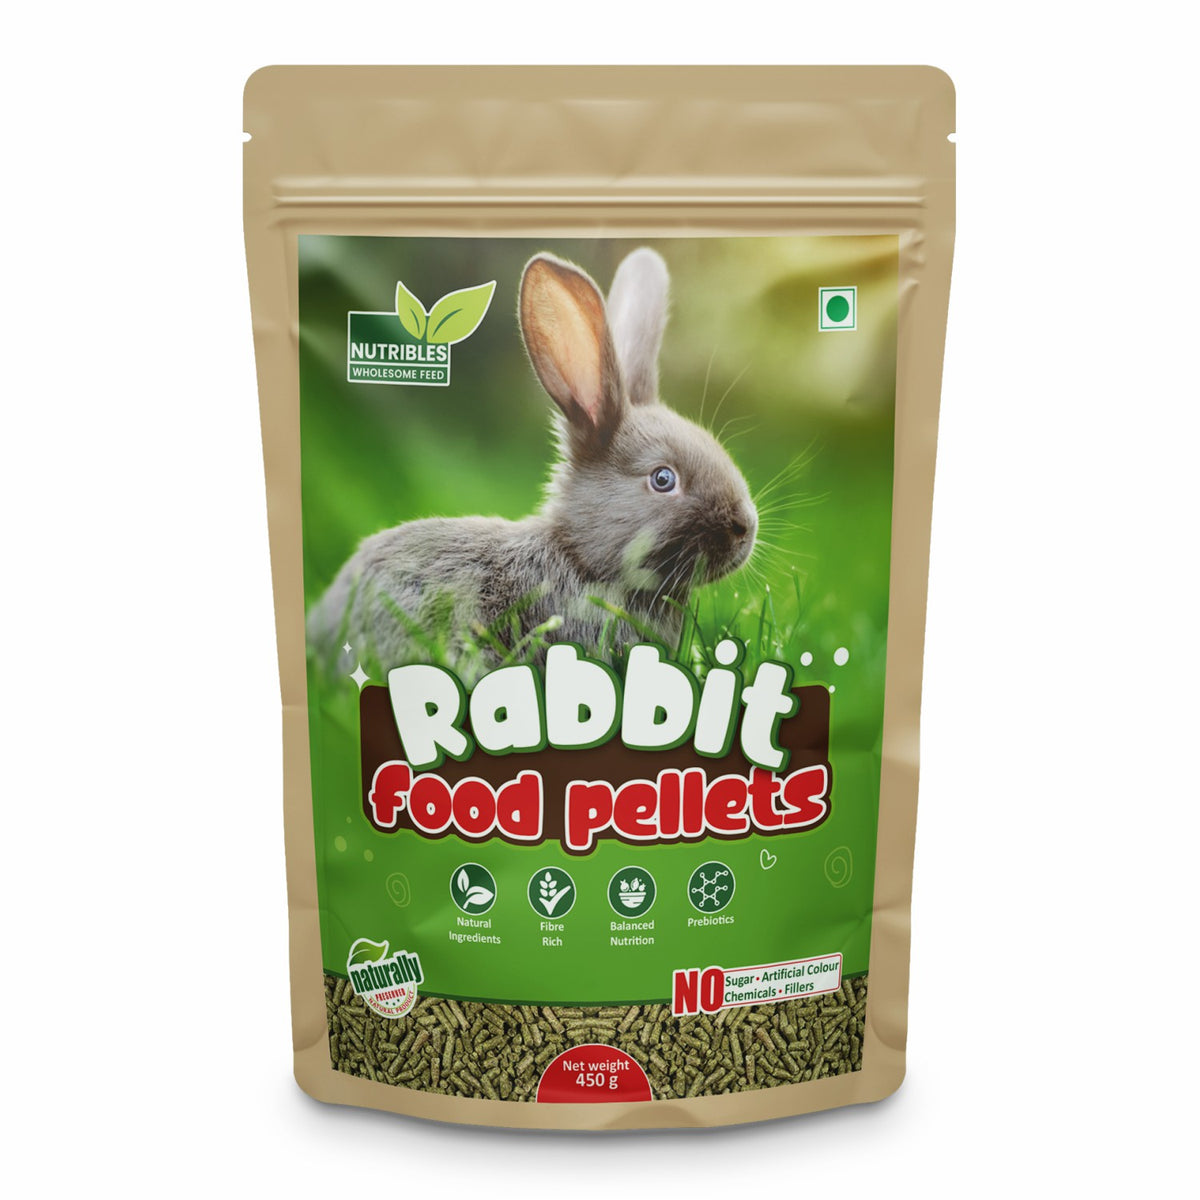 Nutribles Rabbit Food Pellets 450 GMS (Pack of 1) | Premium Natural Food for All Rabbits, Hamster, Guinea Pigs | Pellets for Rabbits and, Age Groups | Balanced Nutrition